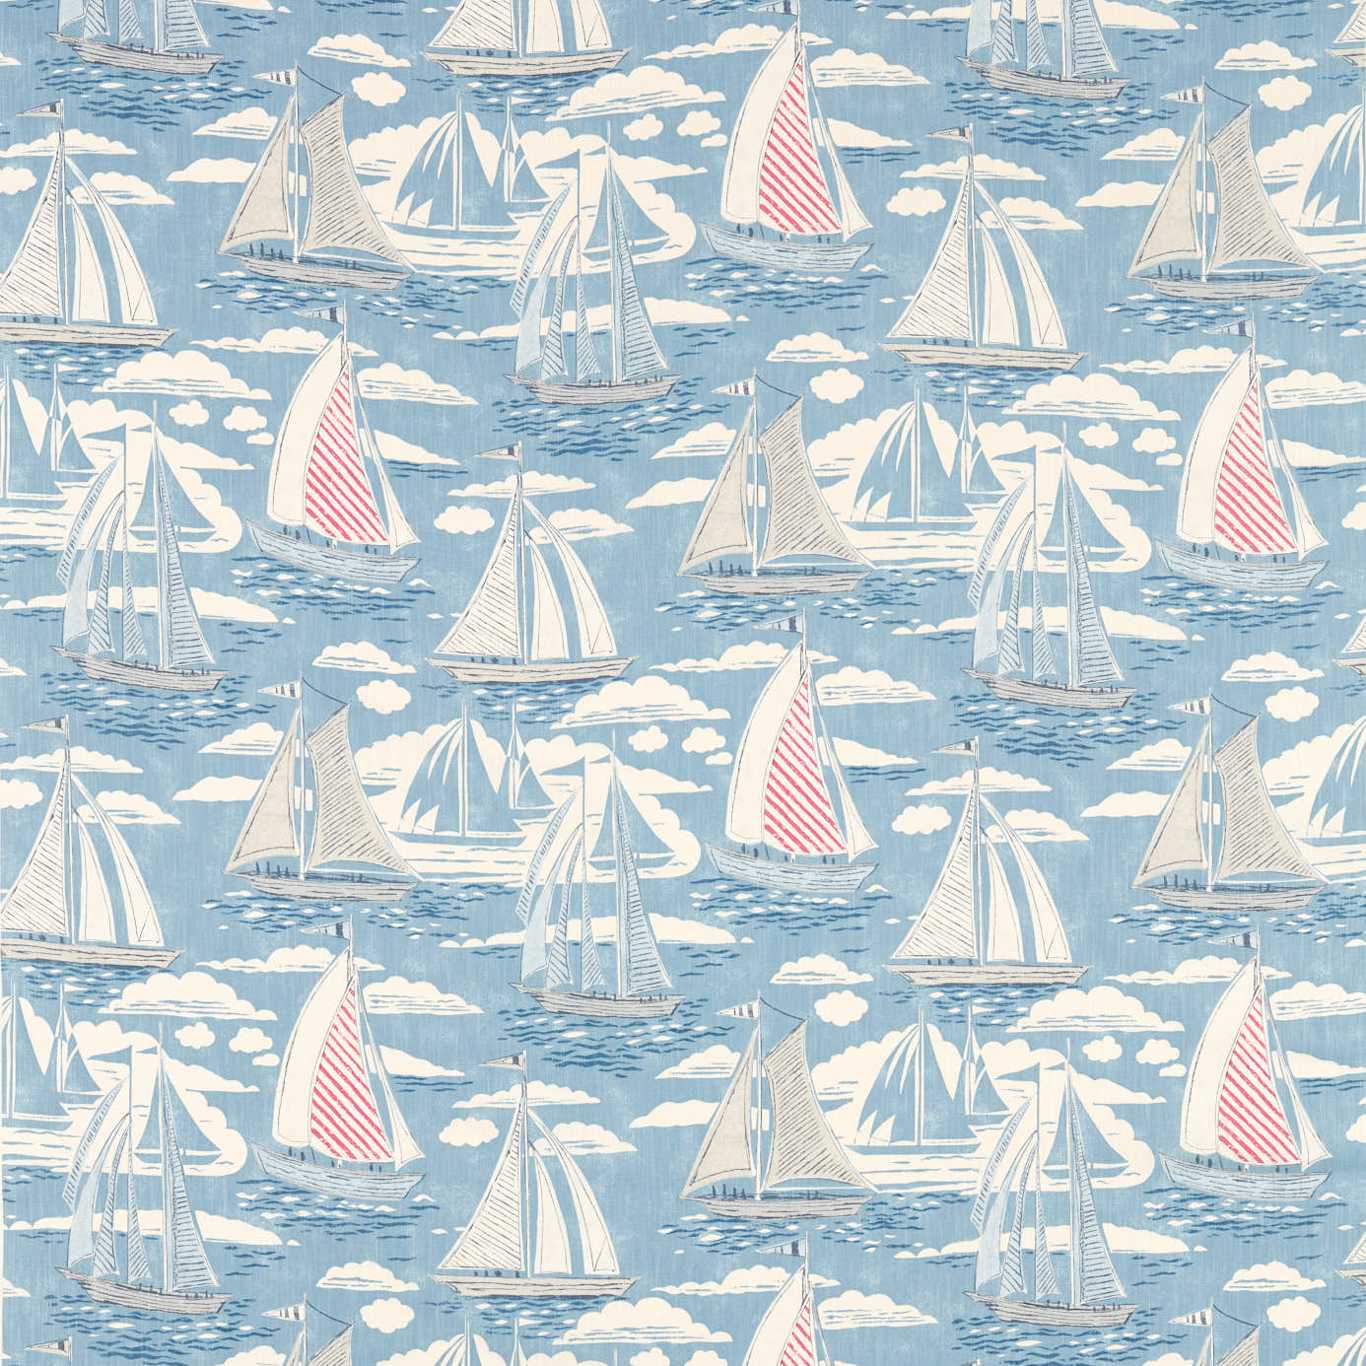 Sailor Fabric by Sanderson Home